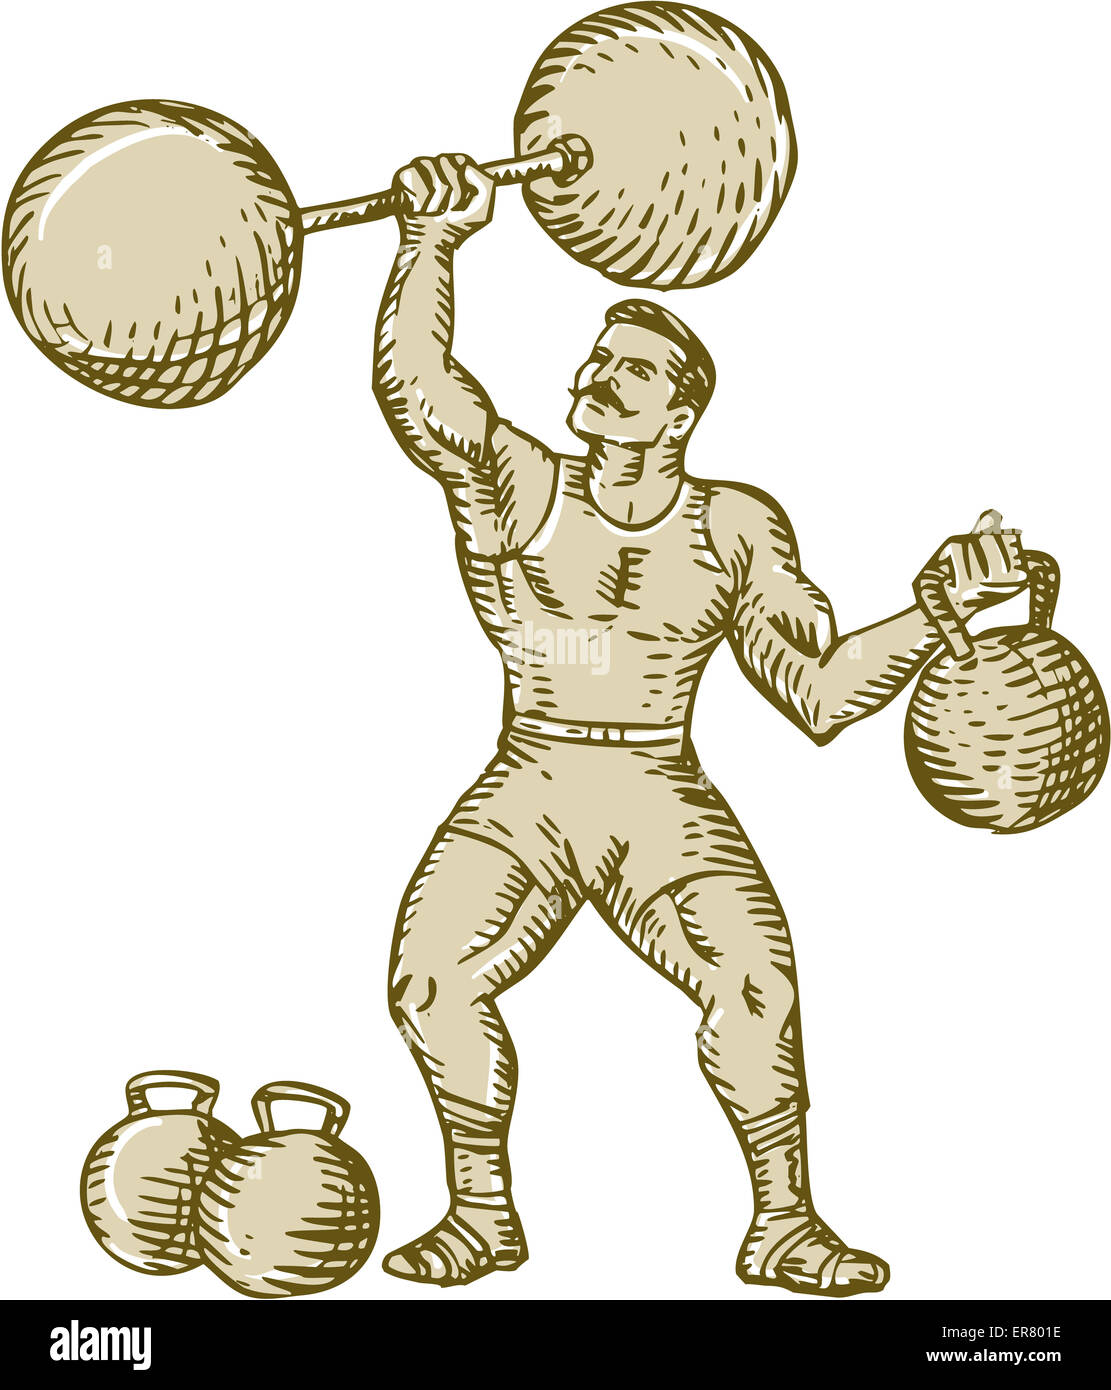 Etching engraving handmade style illustration of a strongman circus  performer lifting barbell on one hand and kettlebell on the Stock Photo -  Alamy